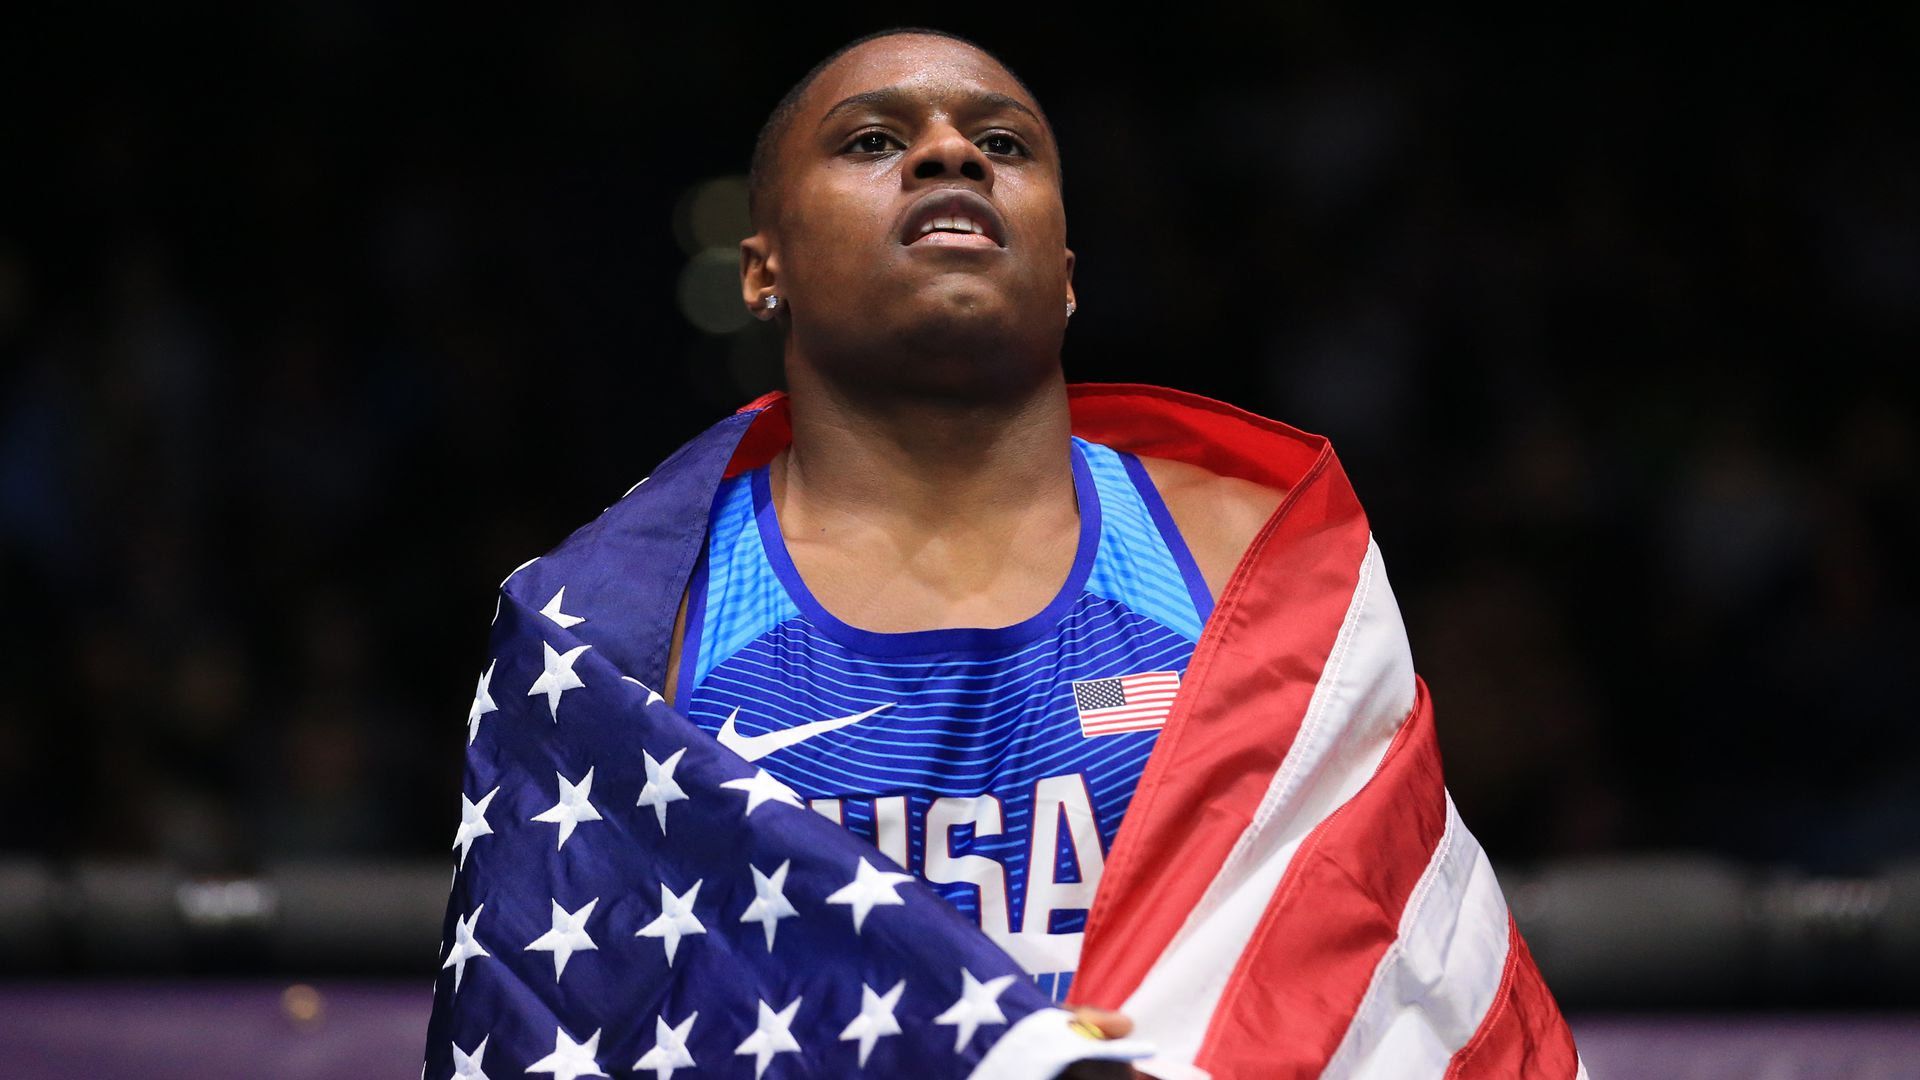 Christian Coleman at the IAAF World Indoor Championships wrapped in an American flag